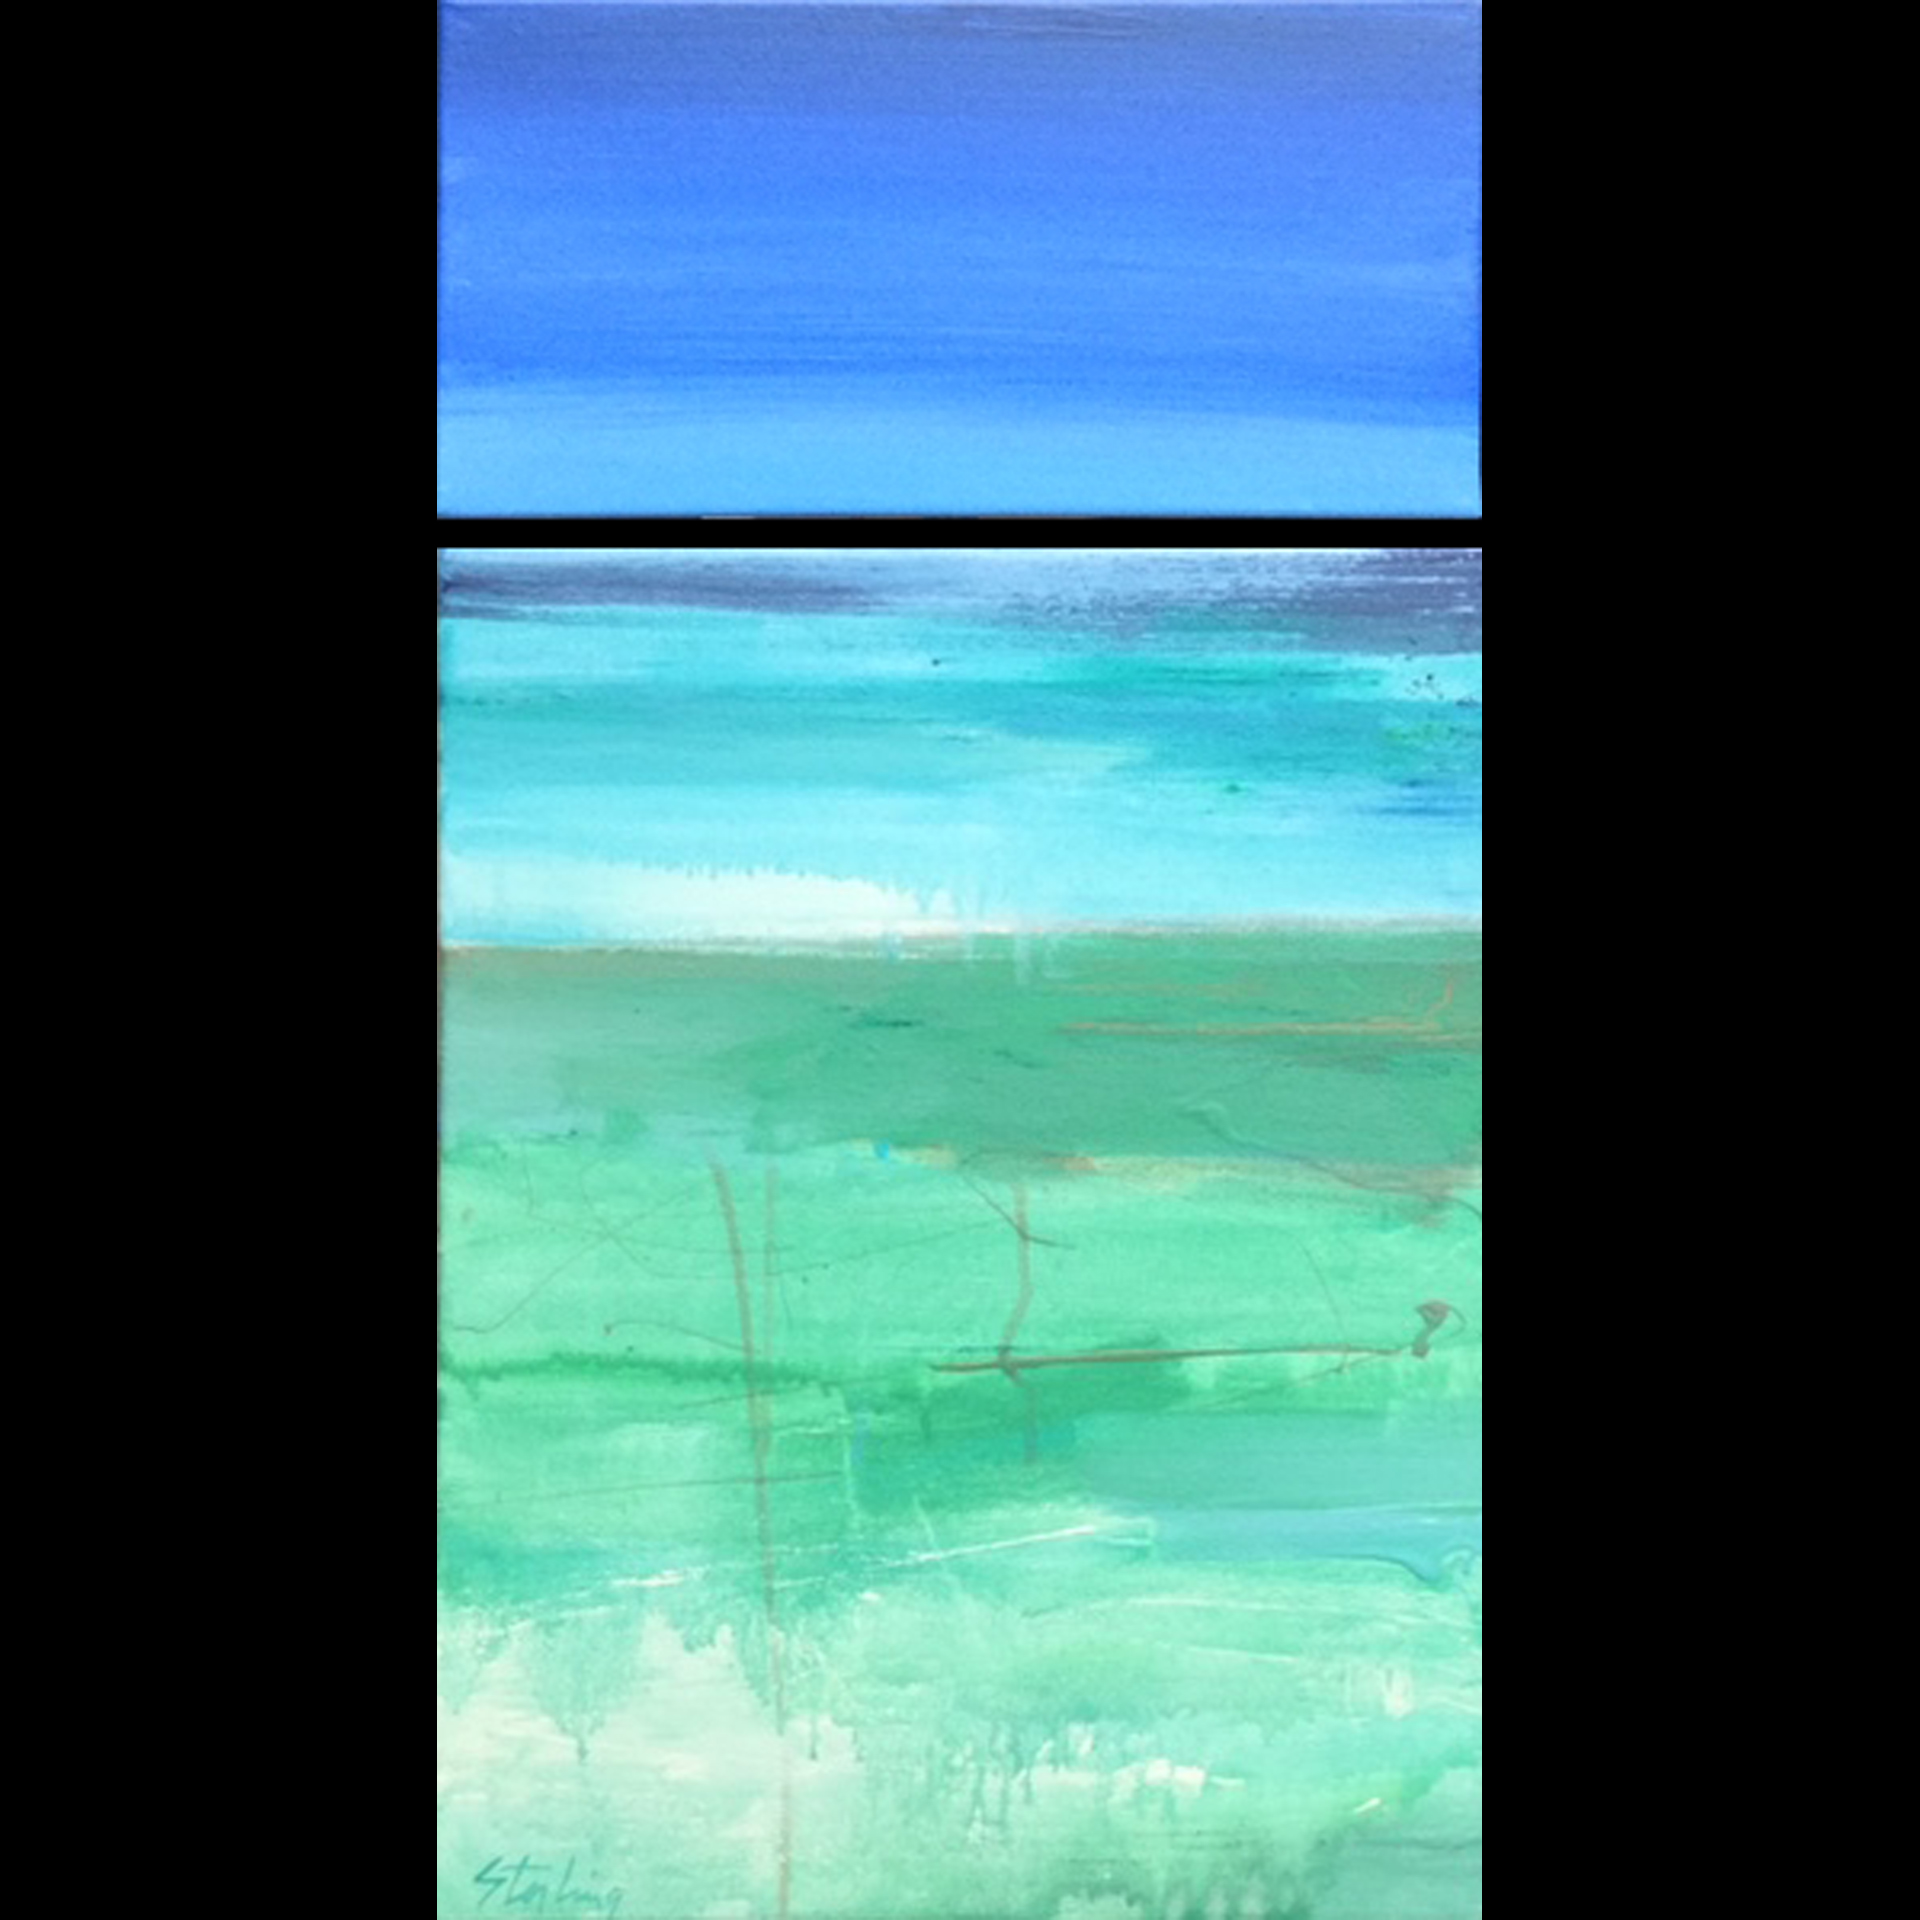 SEA LEVEL
acrylic on canvas diptych 14x26
$240 SOLD